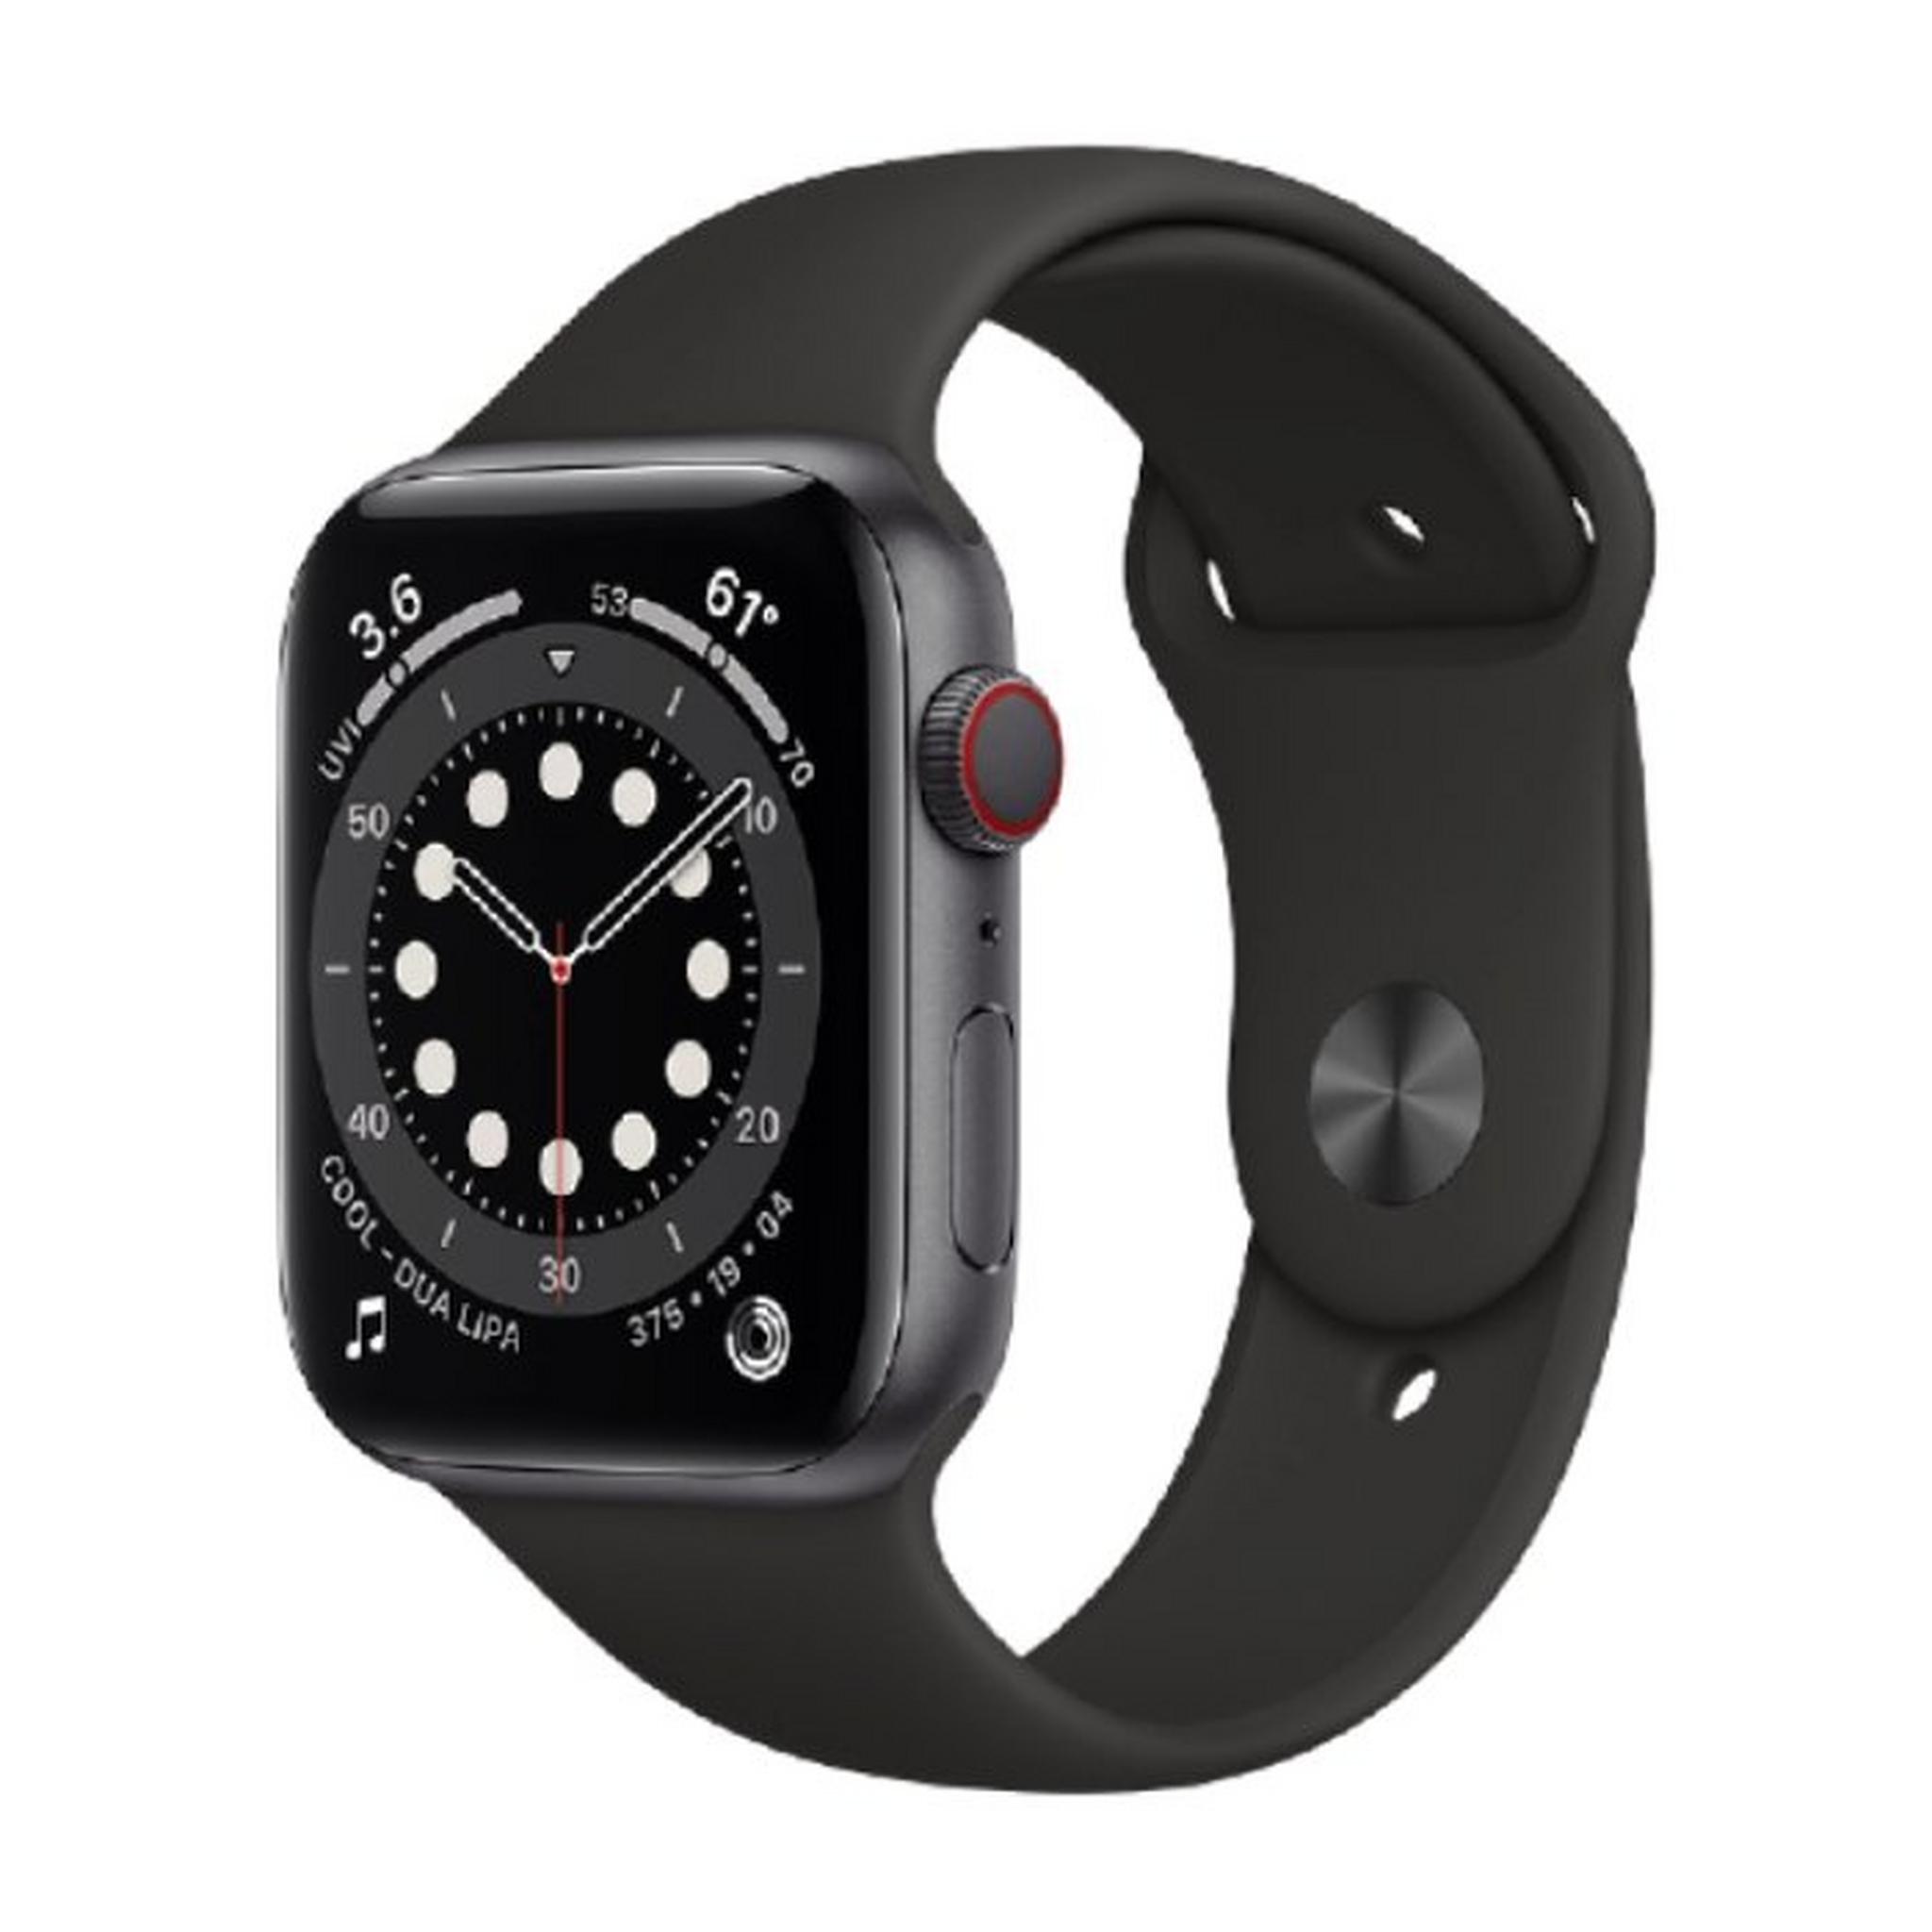 Apple Watch Series 6 Cellular 44mm Aluminum Case with Sports Band - Space Gray / Black